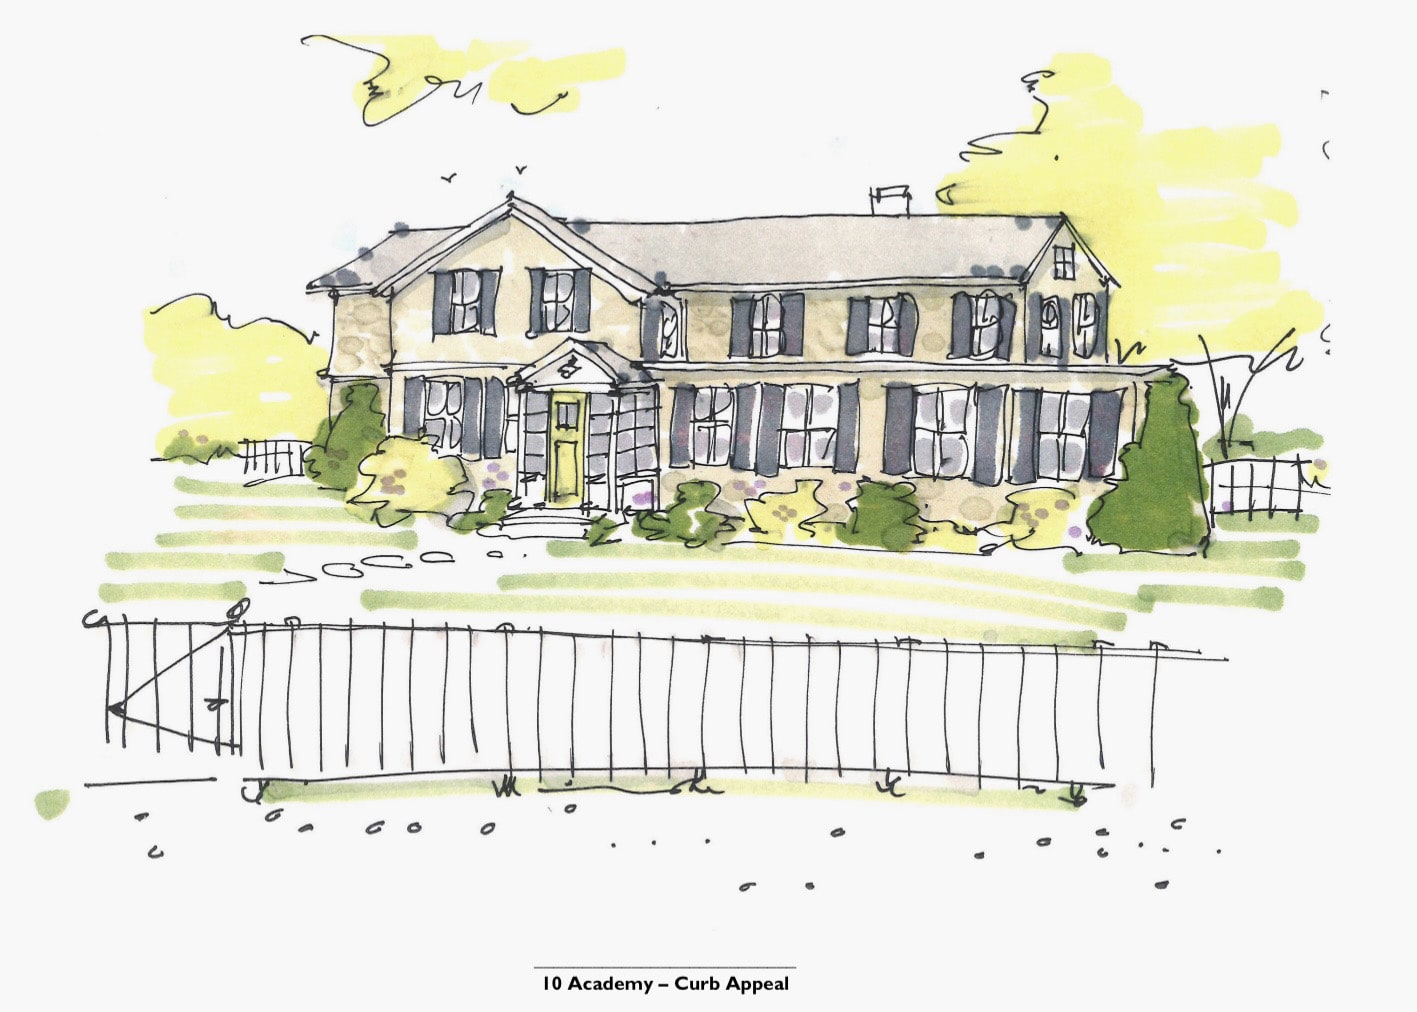 Initial sketch of client's home with renovation and additions.